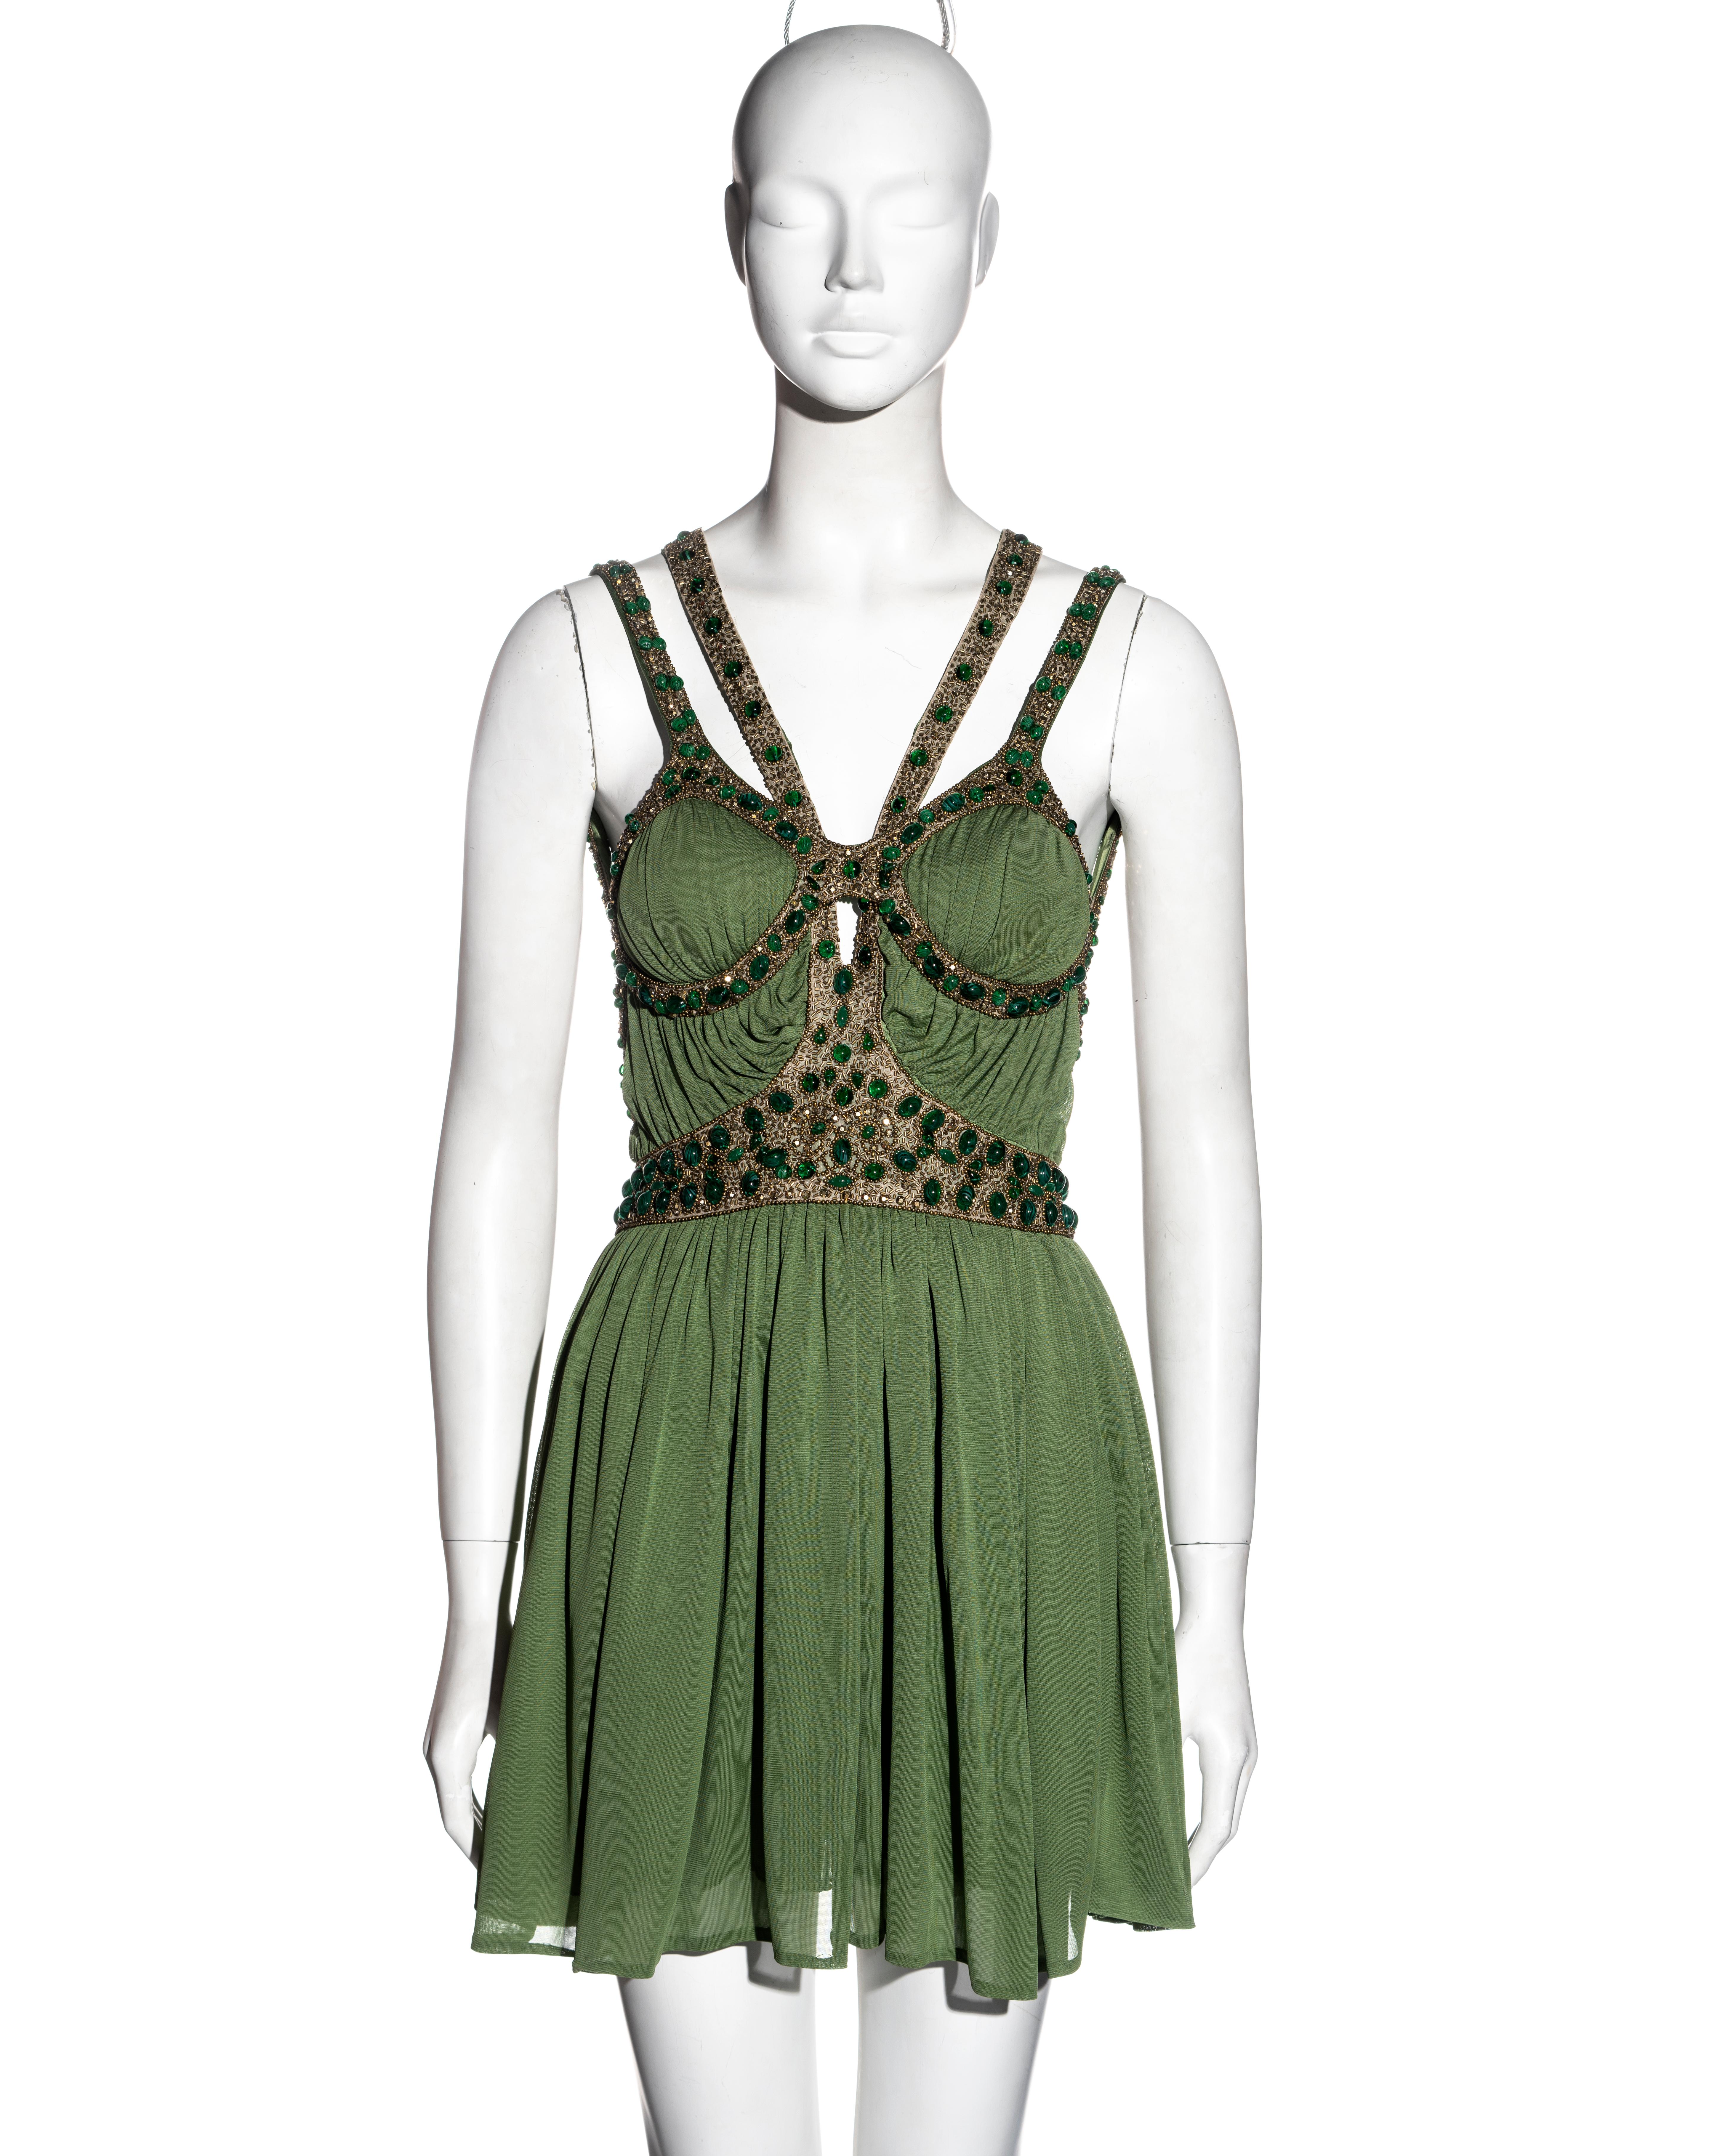 ▪ Alexander McQueen green silk jersey mini dress
▪ Straps, trim and waist covered in gold beads, Swarovski crystals and cabochon green stones
▪ Pleated mini skirt 
▪ Draped bodice 
▪ IT 40 - FR 36 - UK 8 - US 4
▪ Spring-Summer 2006
▪ Made in Italy